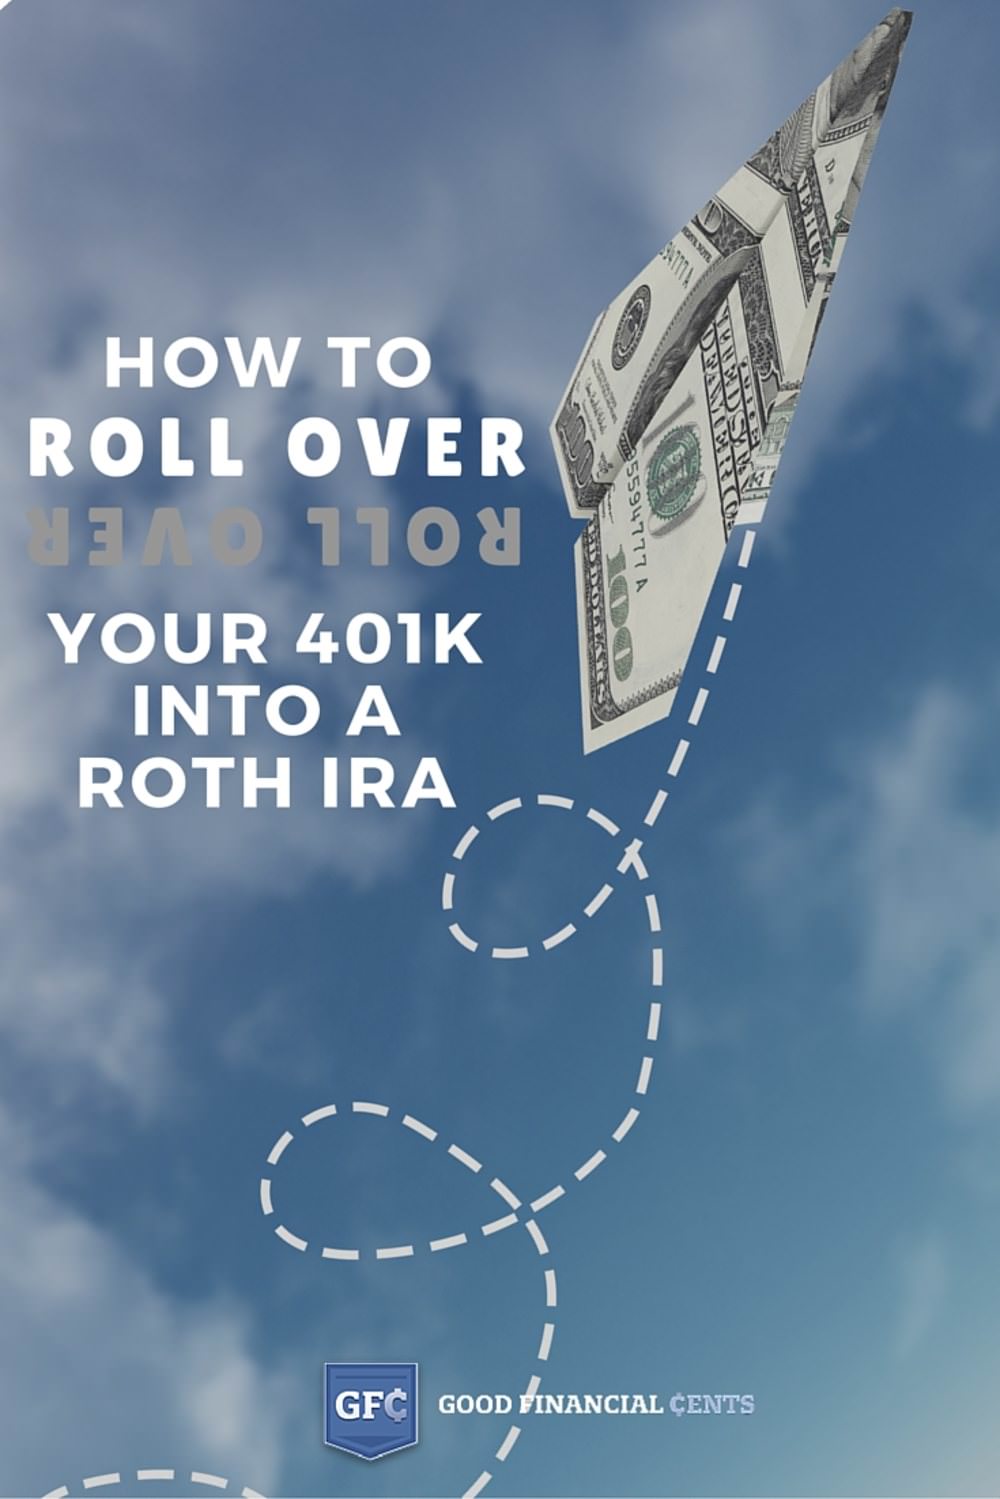 How to Rollover Your 401k to a Roth IRA